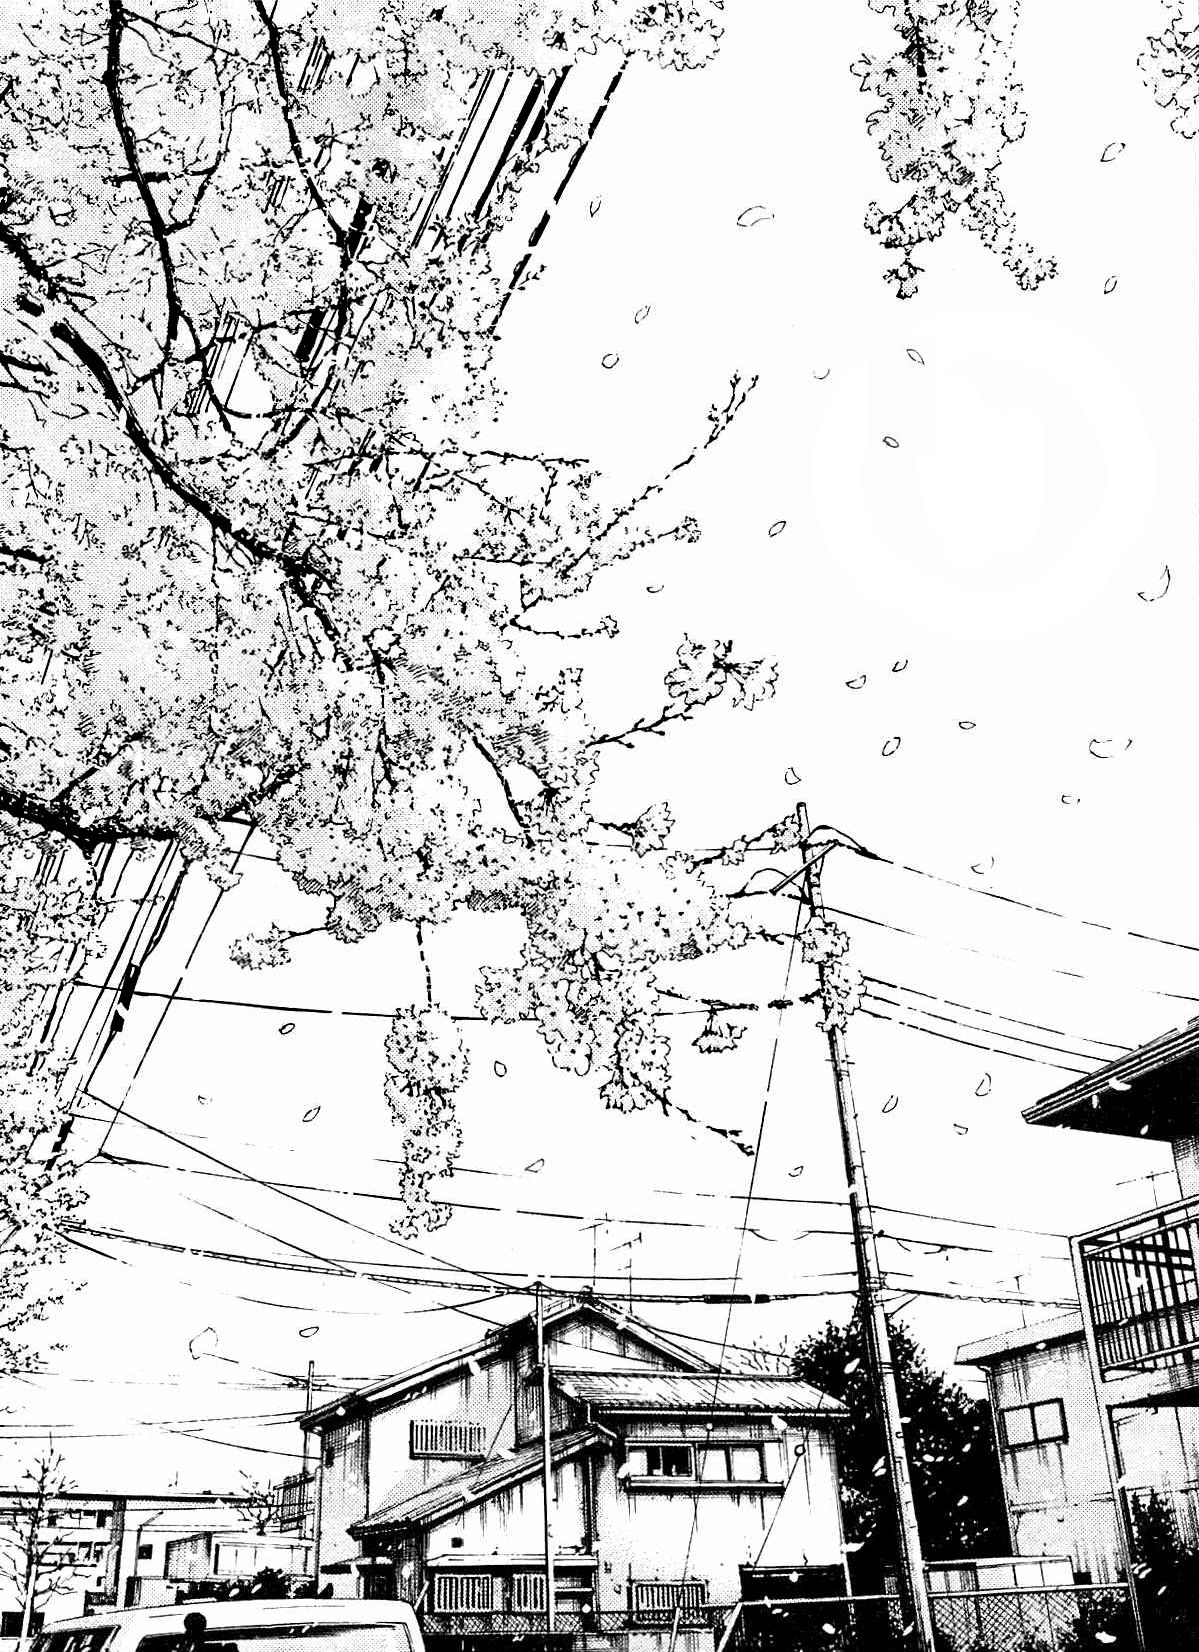 Free download Manga Backdrop Background Textures Urban Sketch Foreground [1199x1652] for your Desktop, Mobile & Tablet. Explore Manga Background. Manga Wallpaper, Manga Wallpaper, Berserk Manga Wallpaper